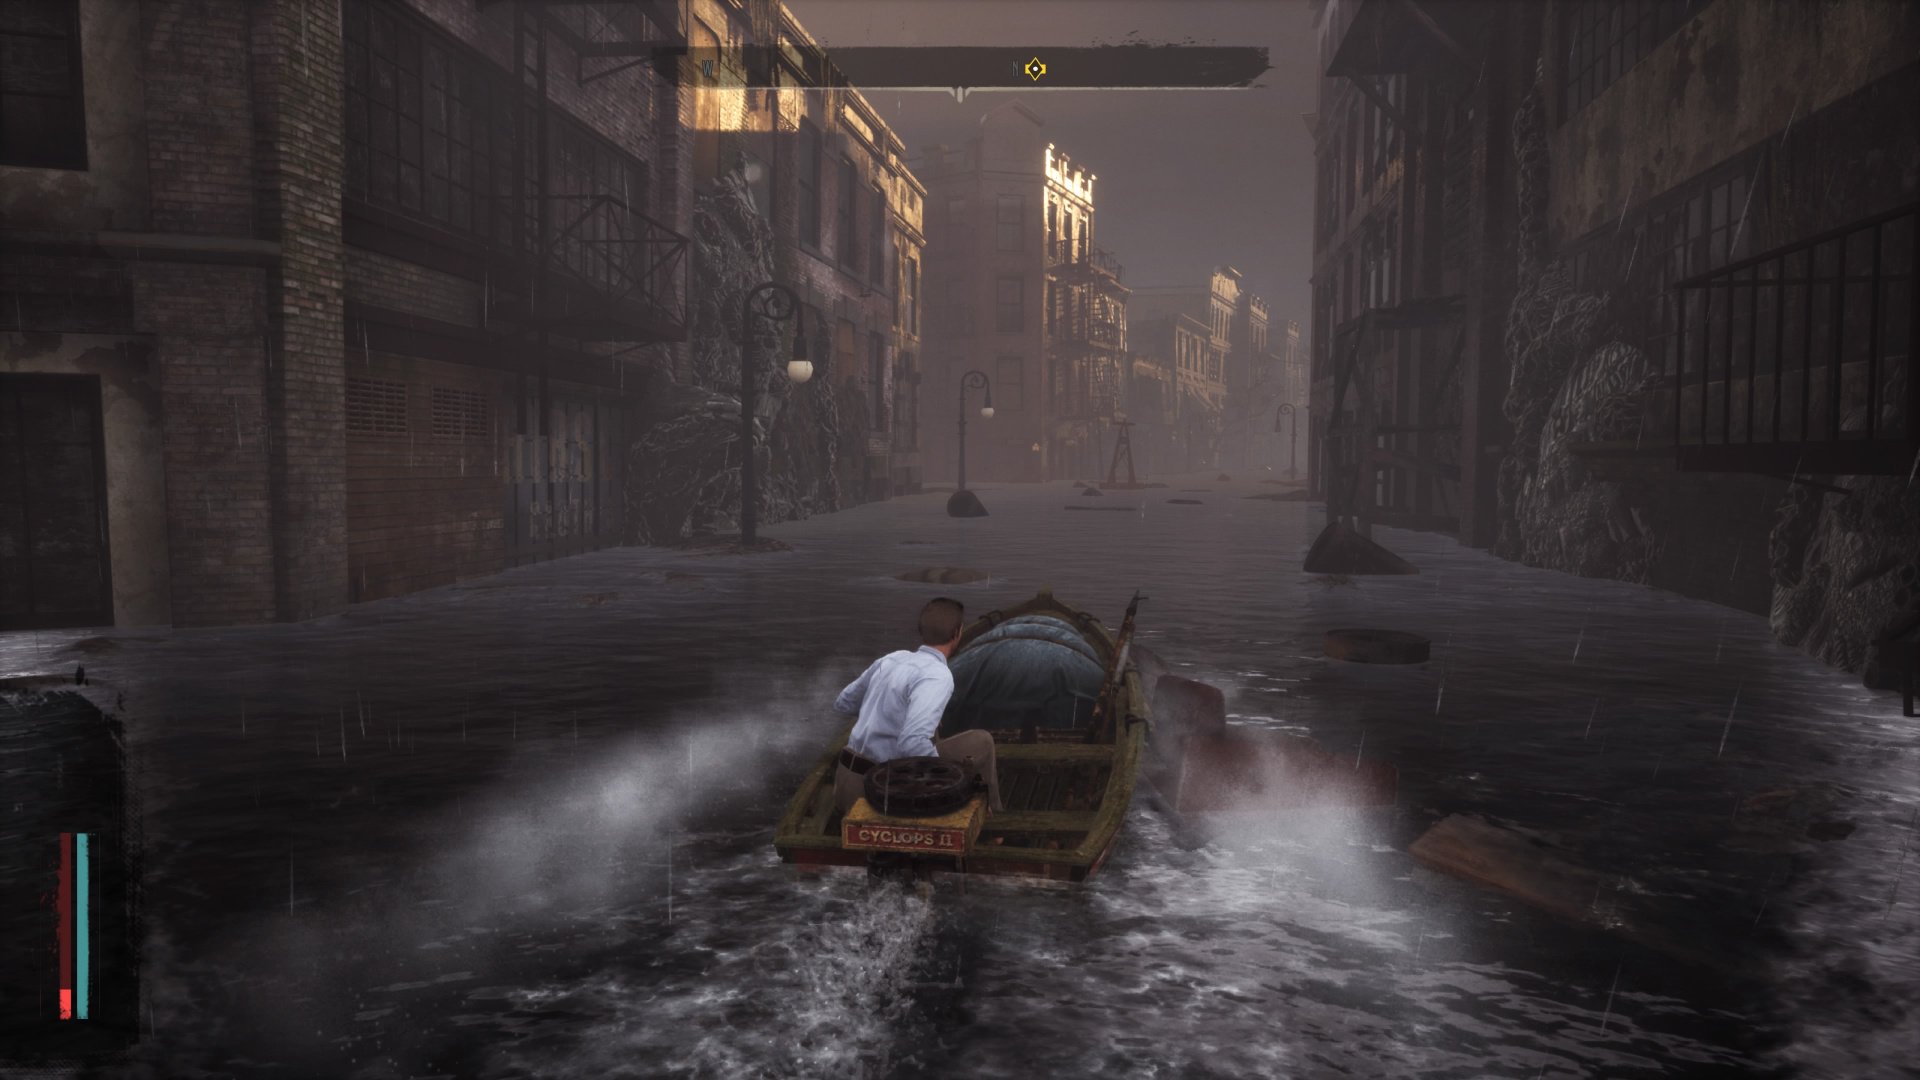 when was the sinking city released